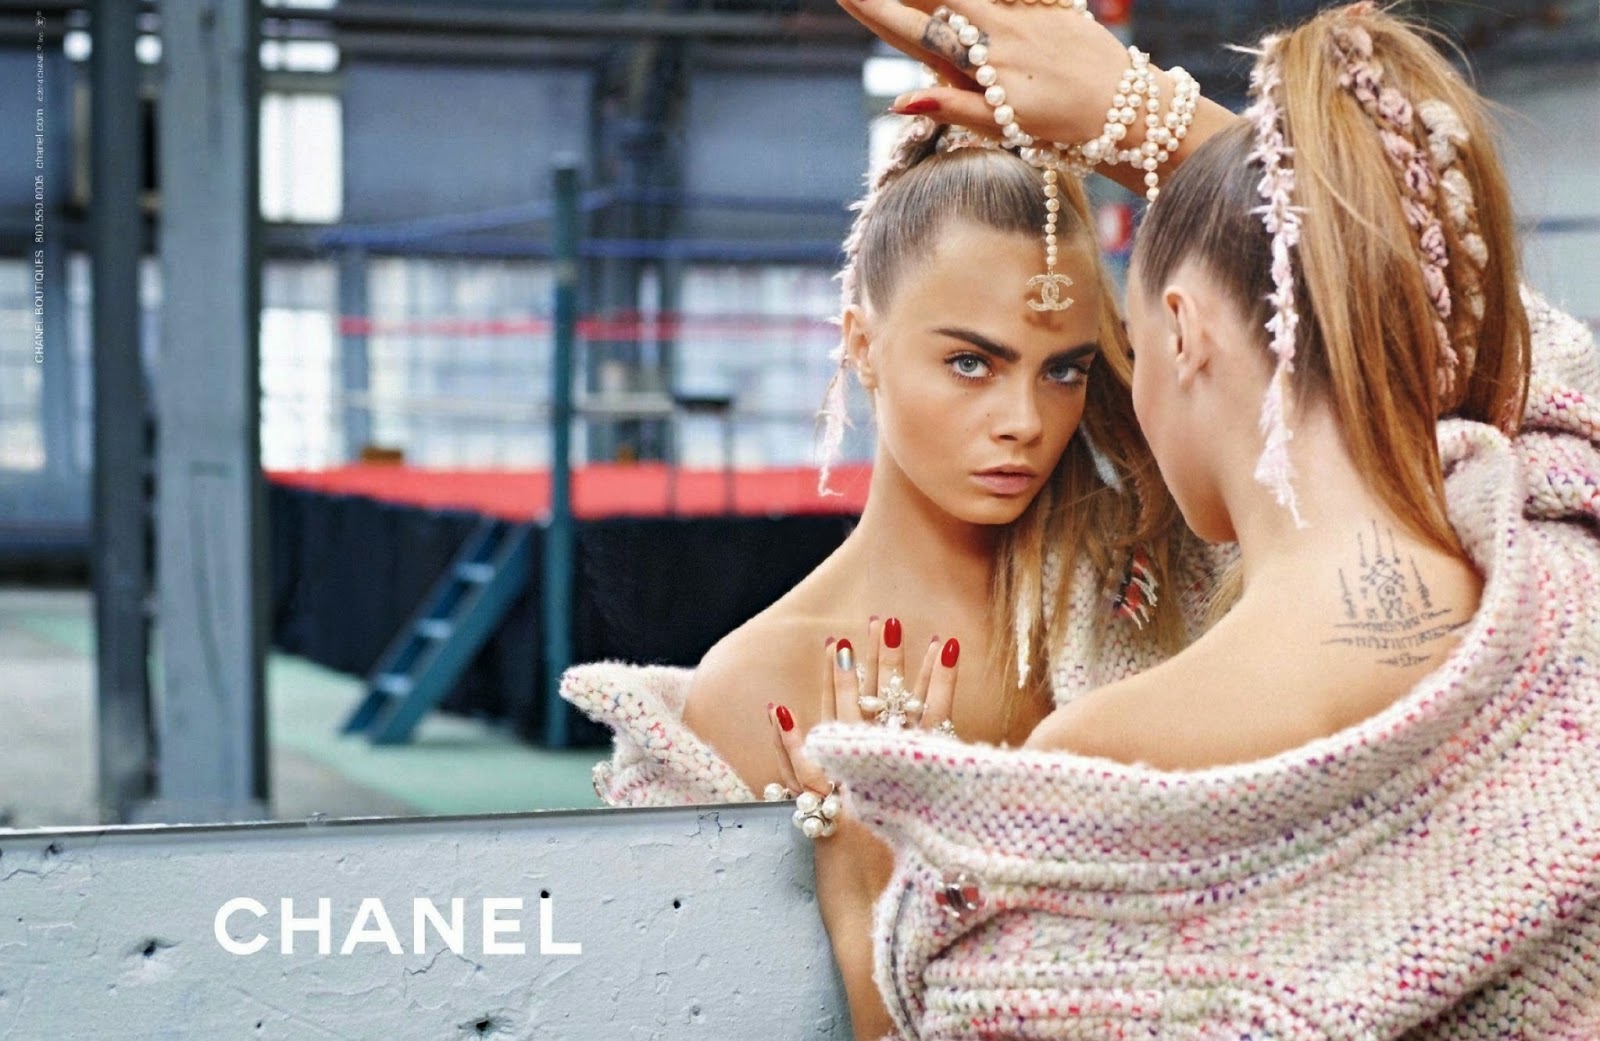 Cara Delevingne fronts Chanel Fall 2014 ad campaign